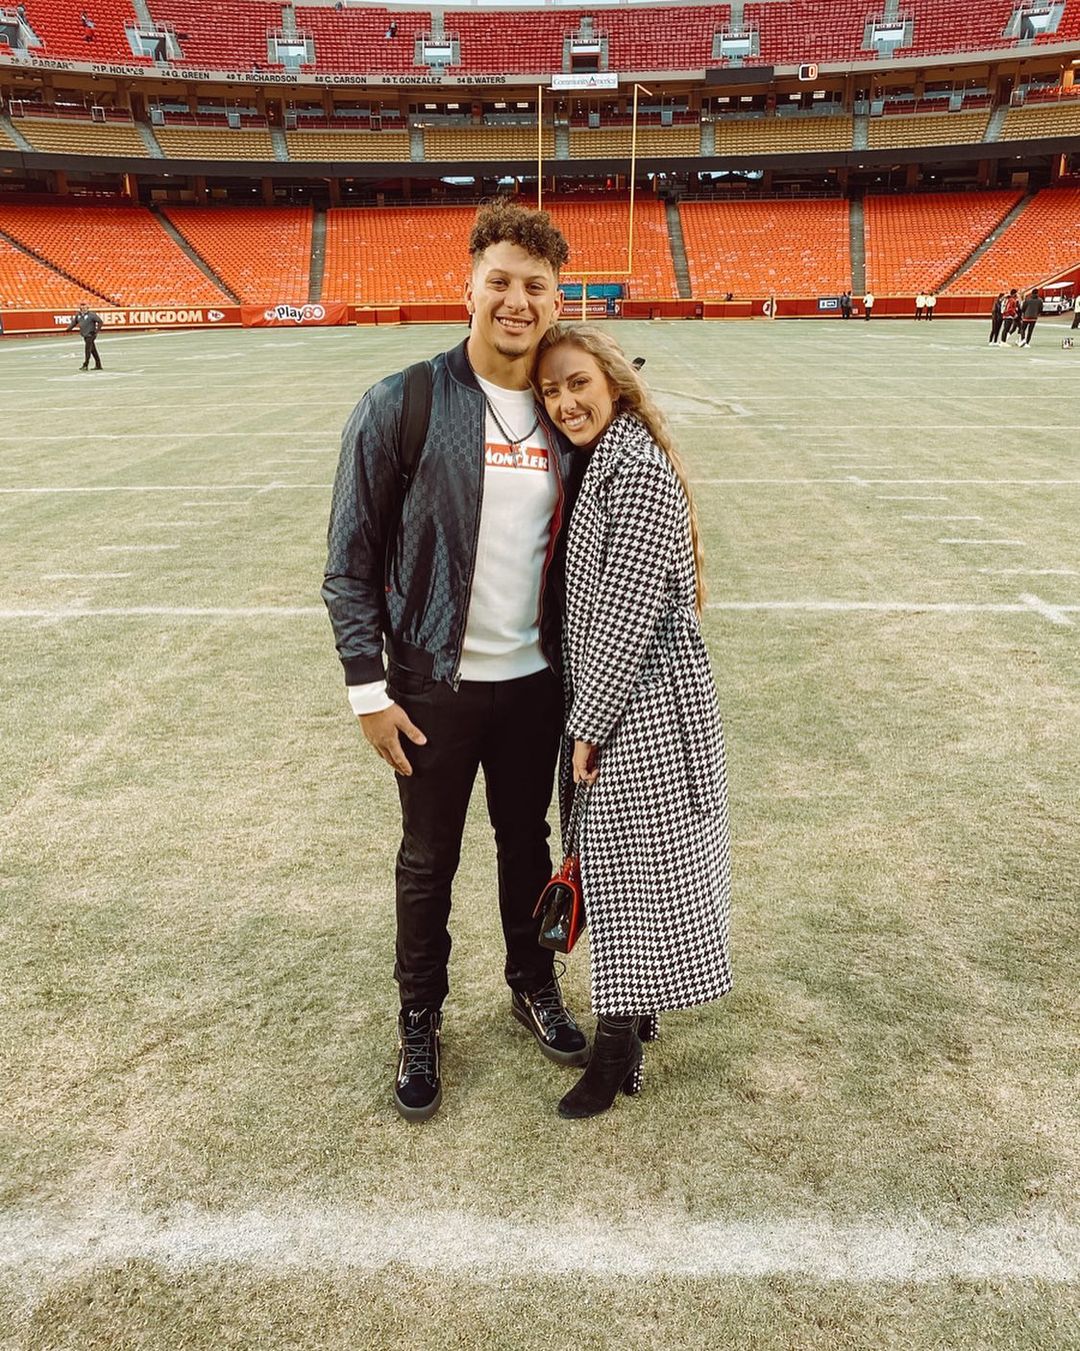 Patrick Mahomes Cuddles Up to Fiancée Brittany Matthews in Romantic  Instagram Photos: 'Me & You